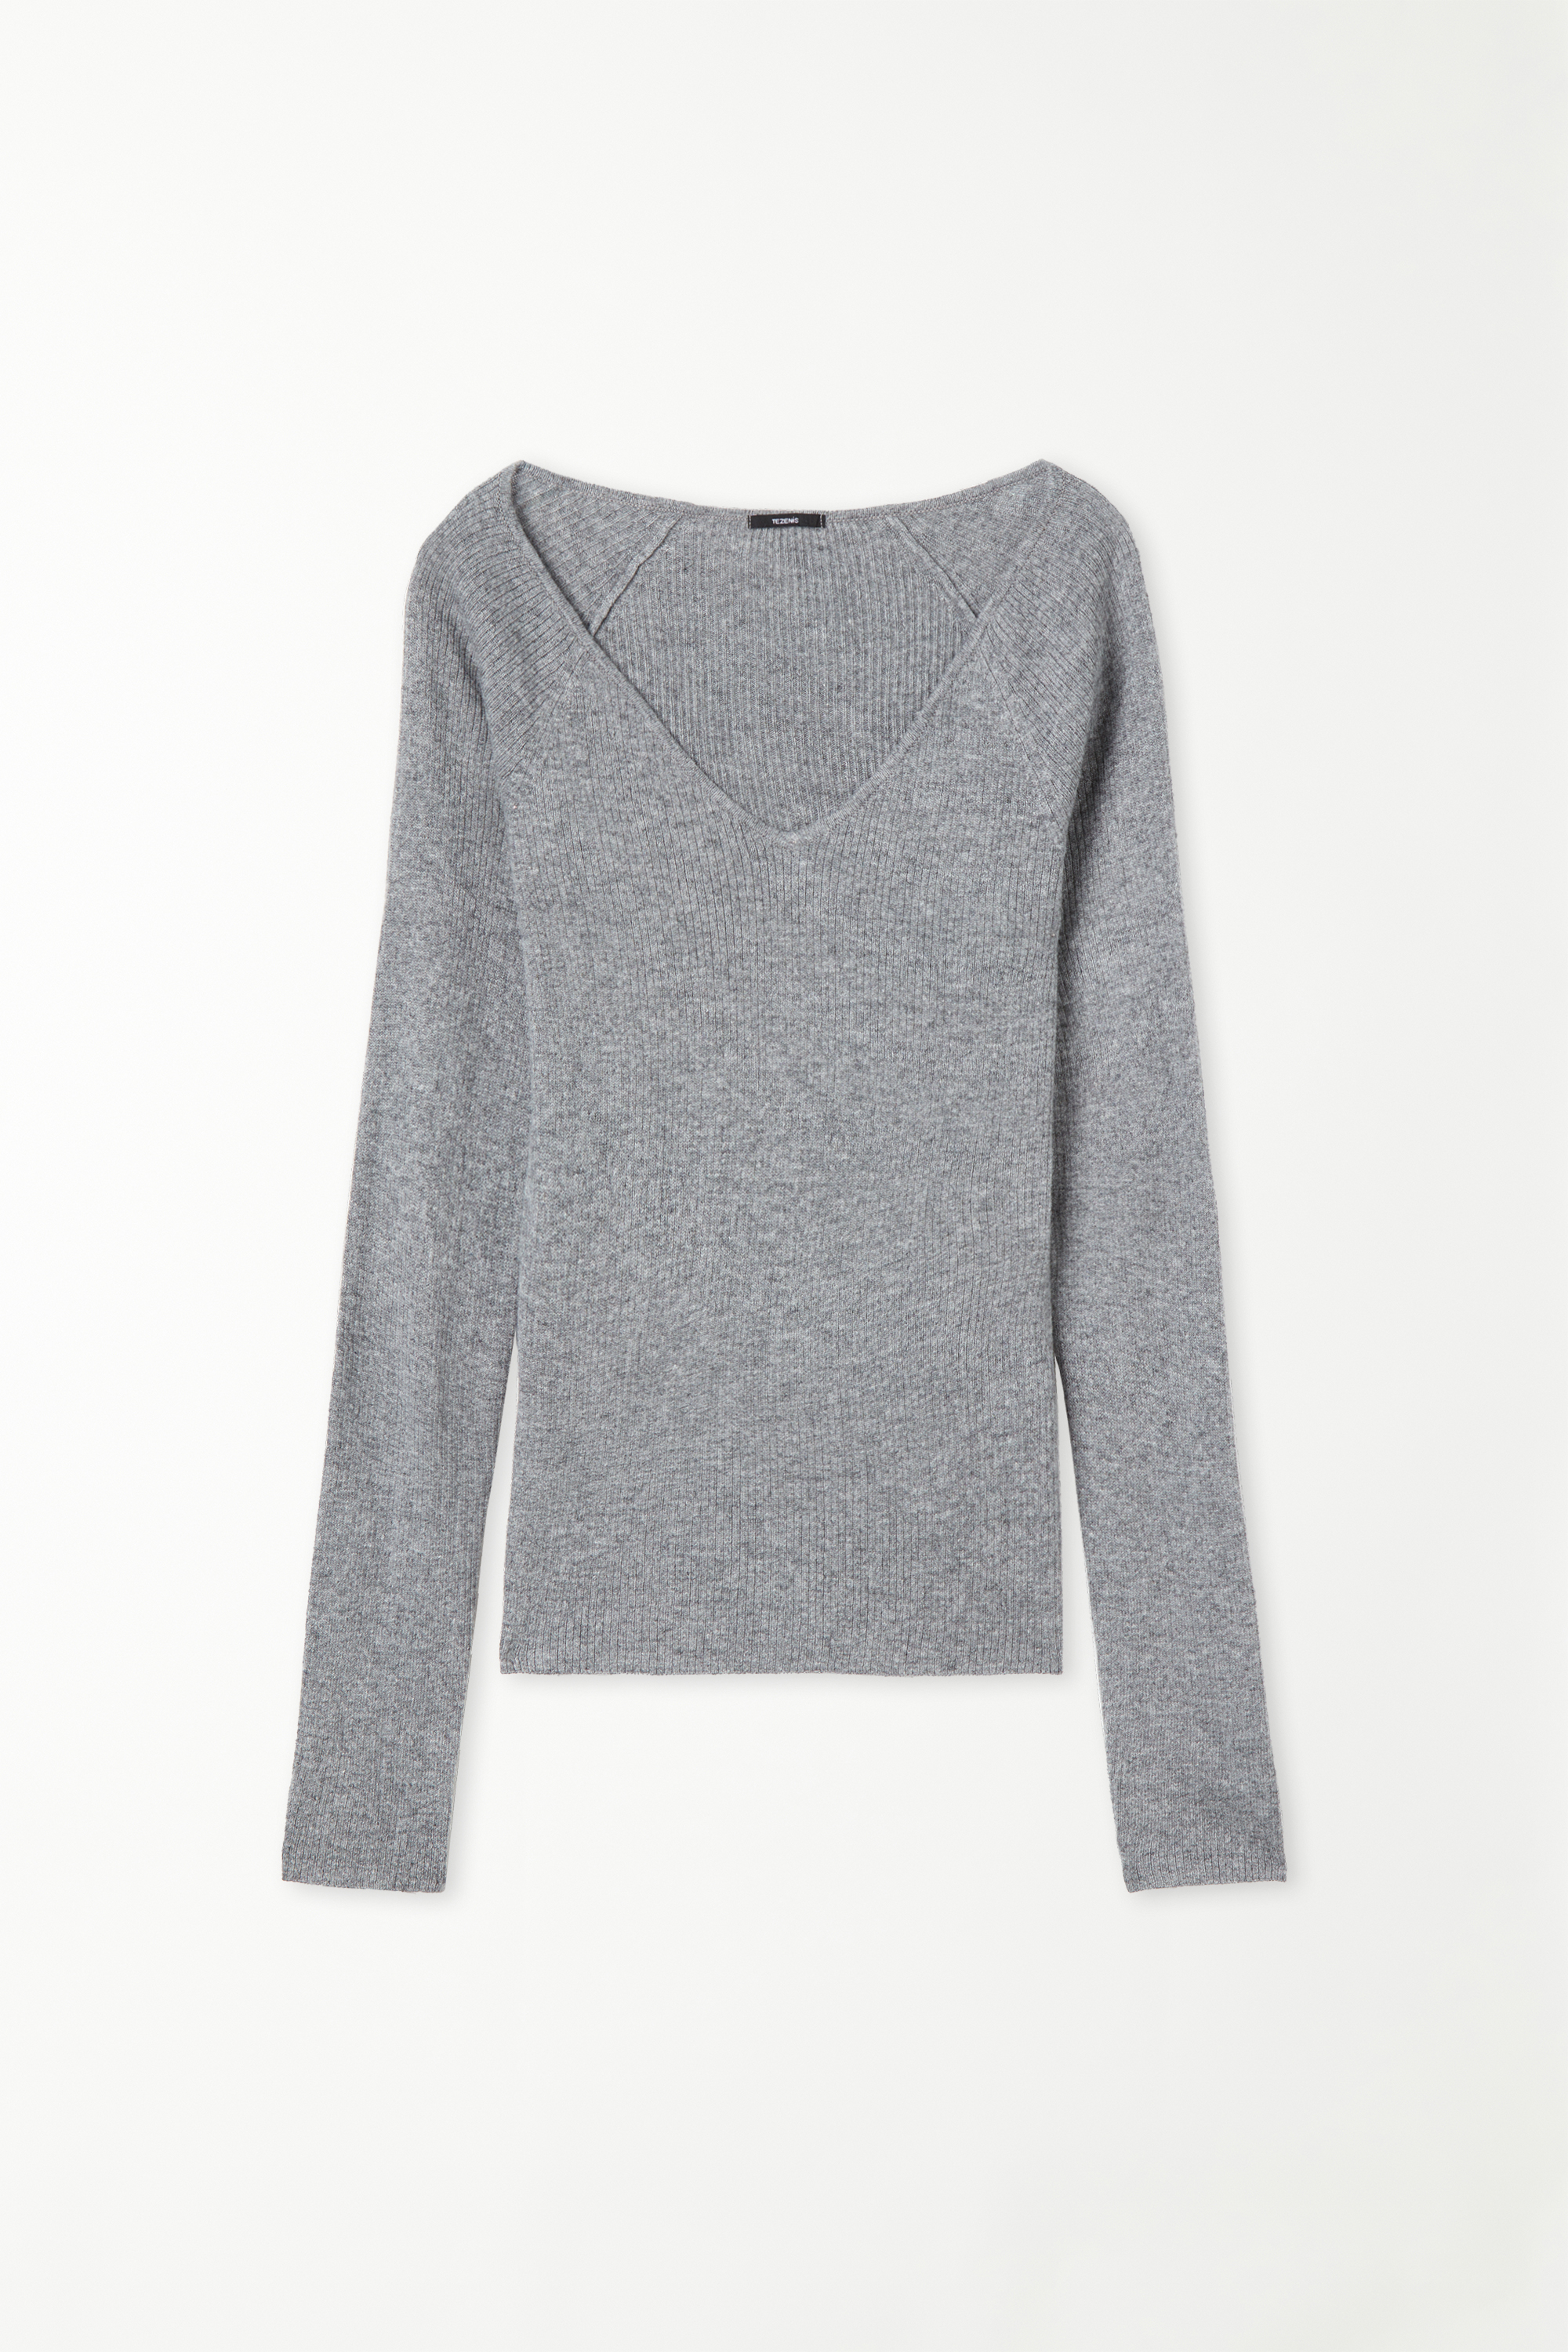 Long-Sleeved V-Neck Heavy Ribbed Jersey with Wool